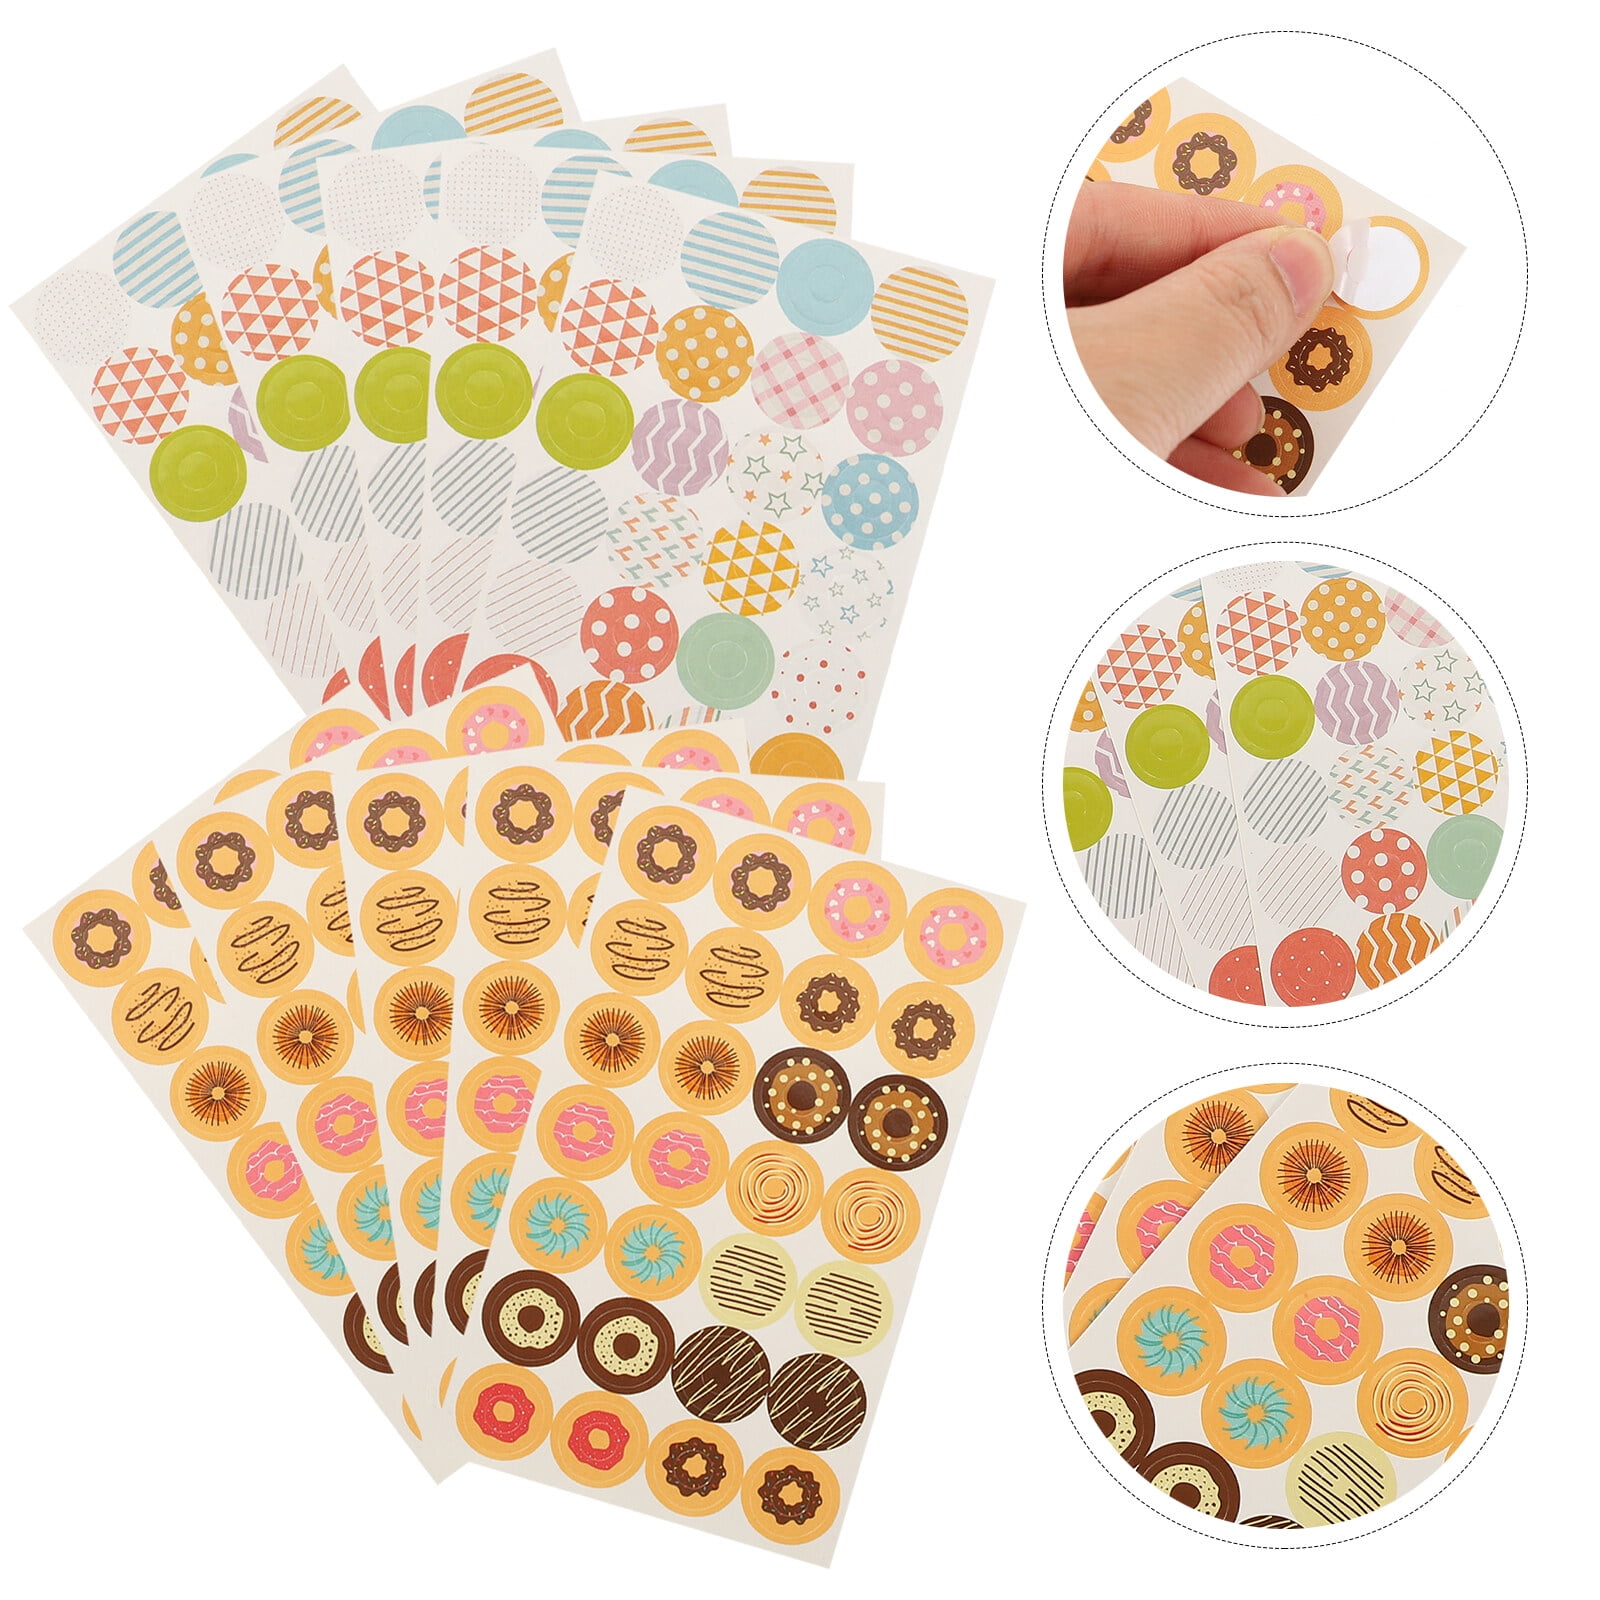 Hole Reinforcement Rings Stickers in a Vintage Look 